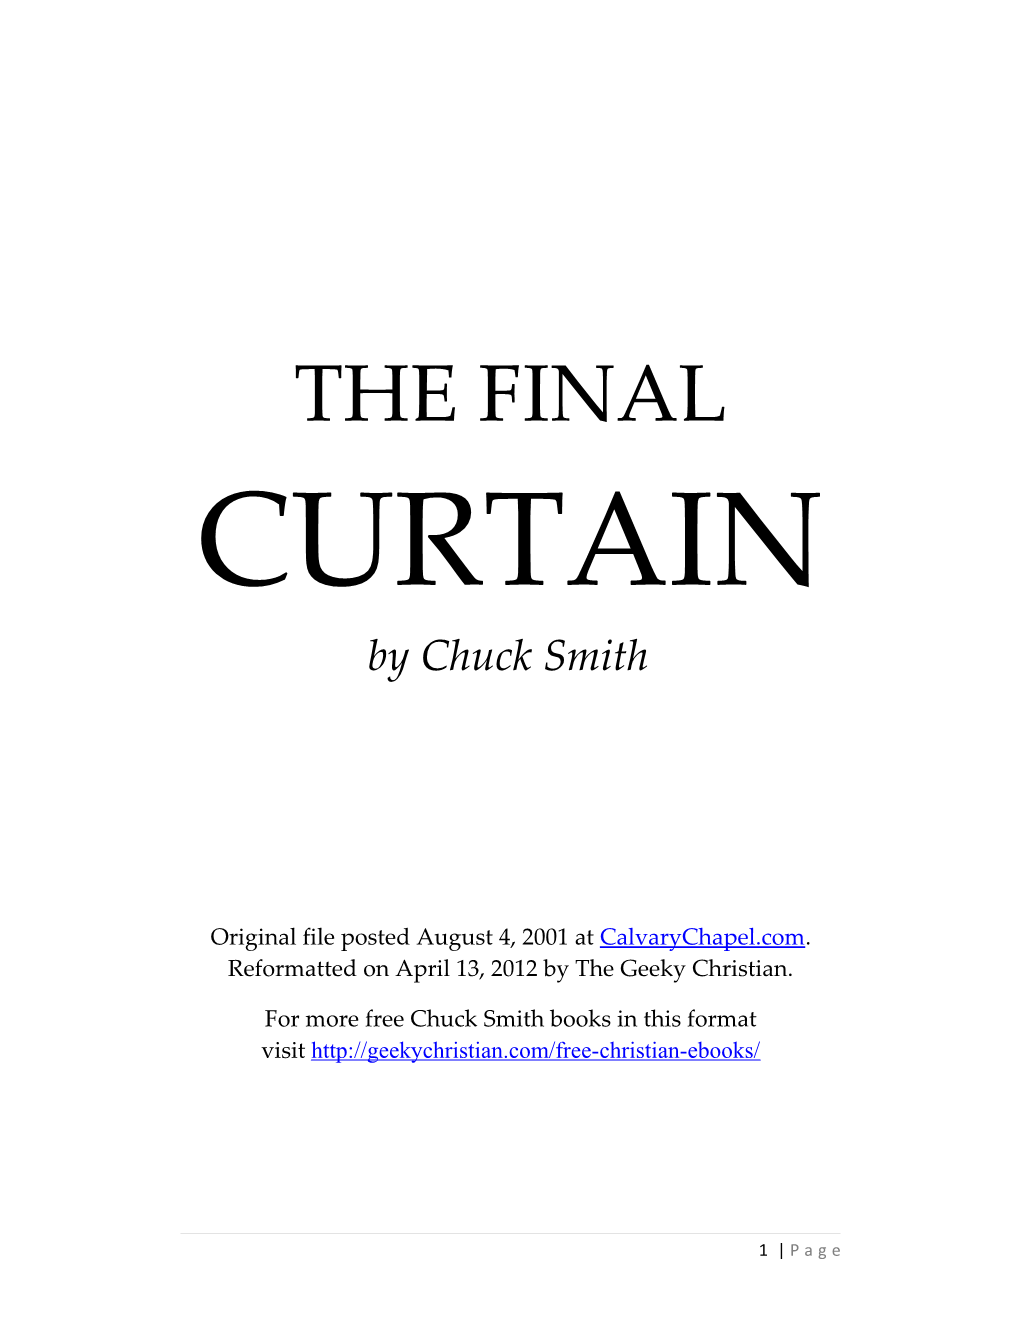 THE FINAL CURTAIN by Chuck Smith